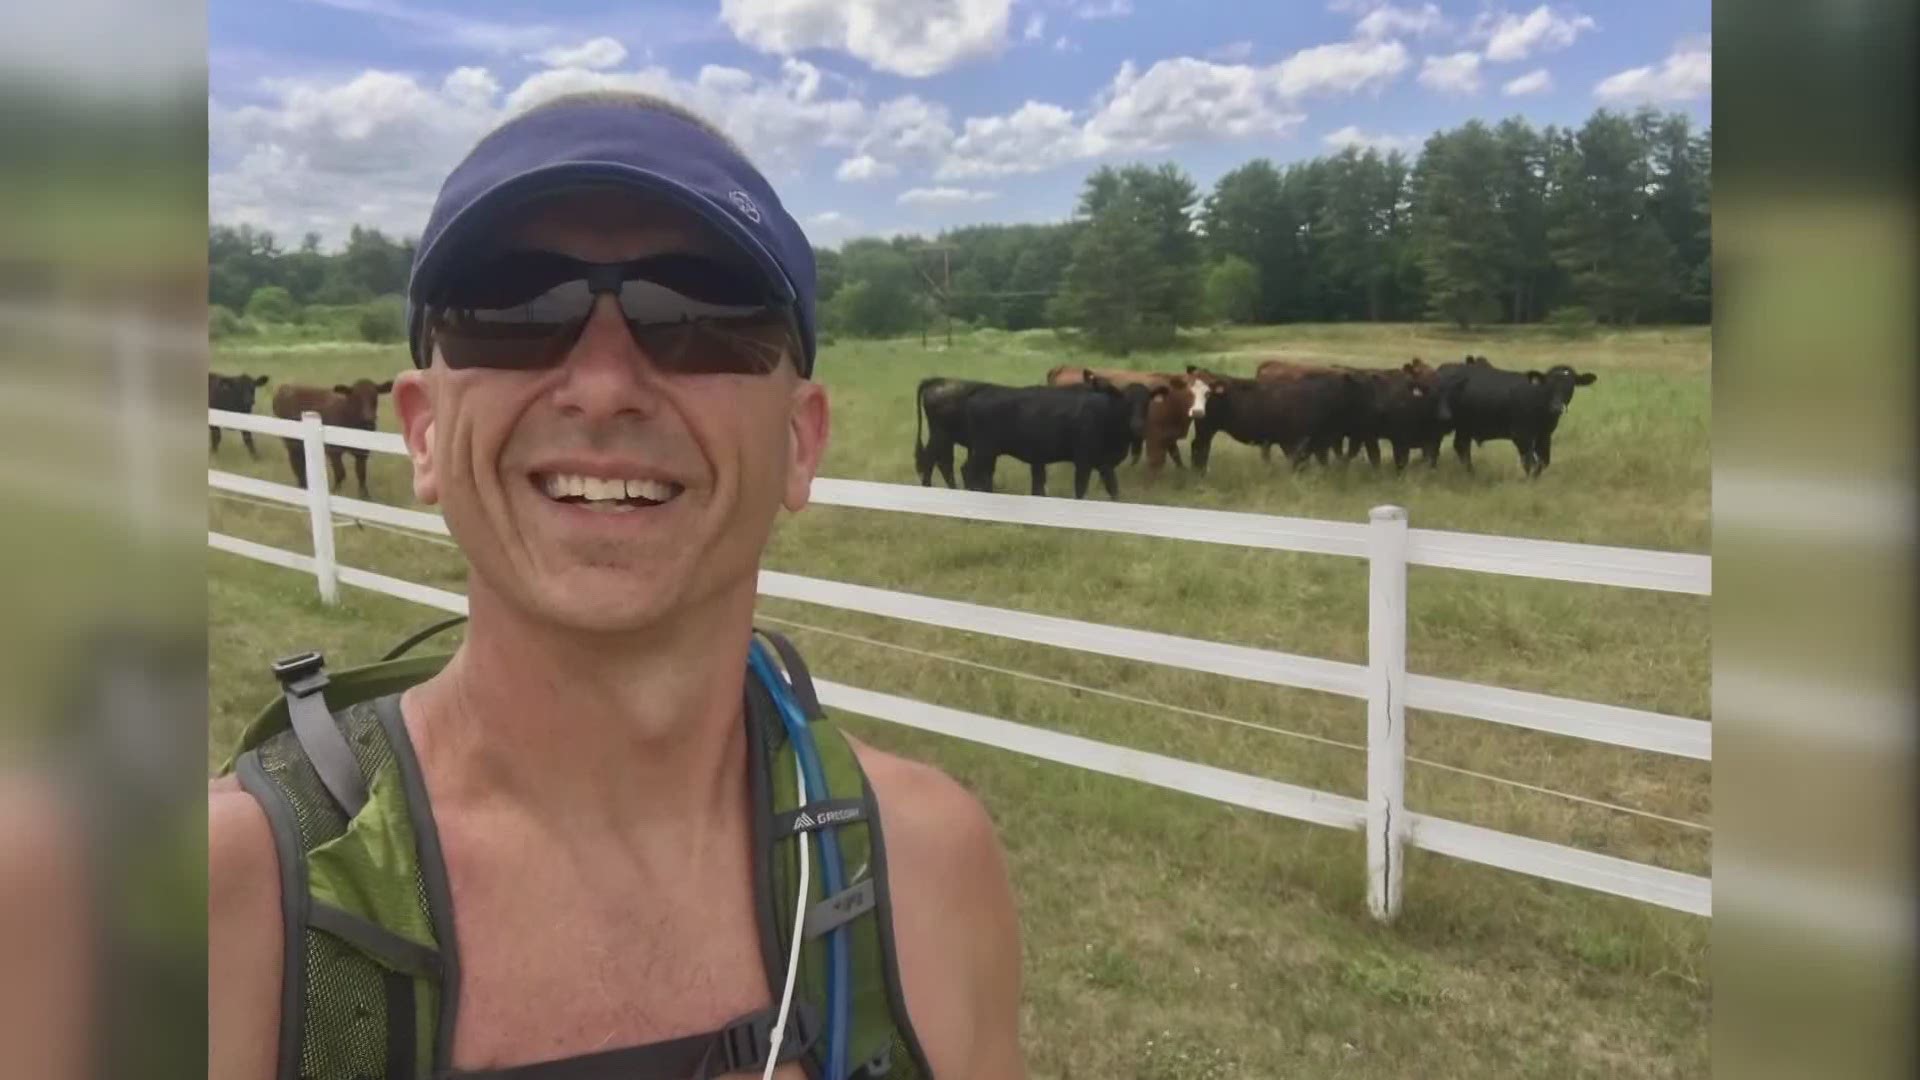 Chris Deveau is running from Saco to Mount Katahdin